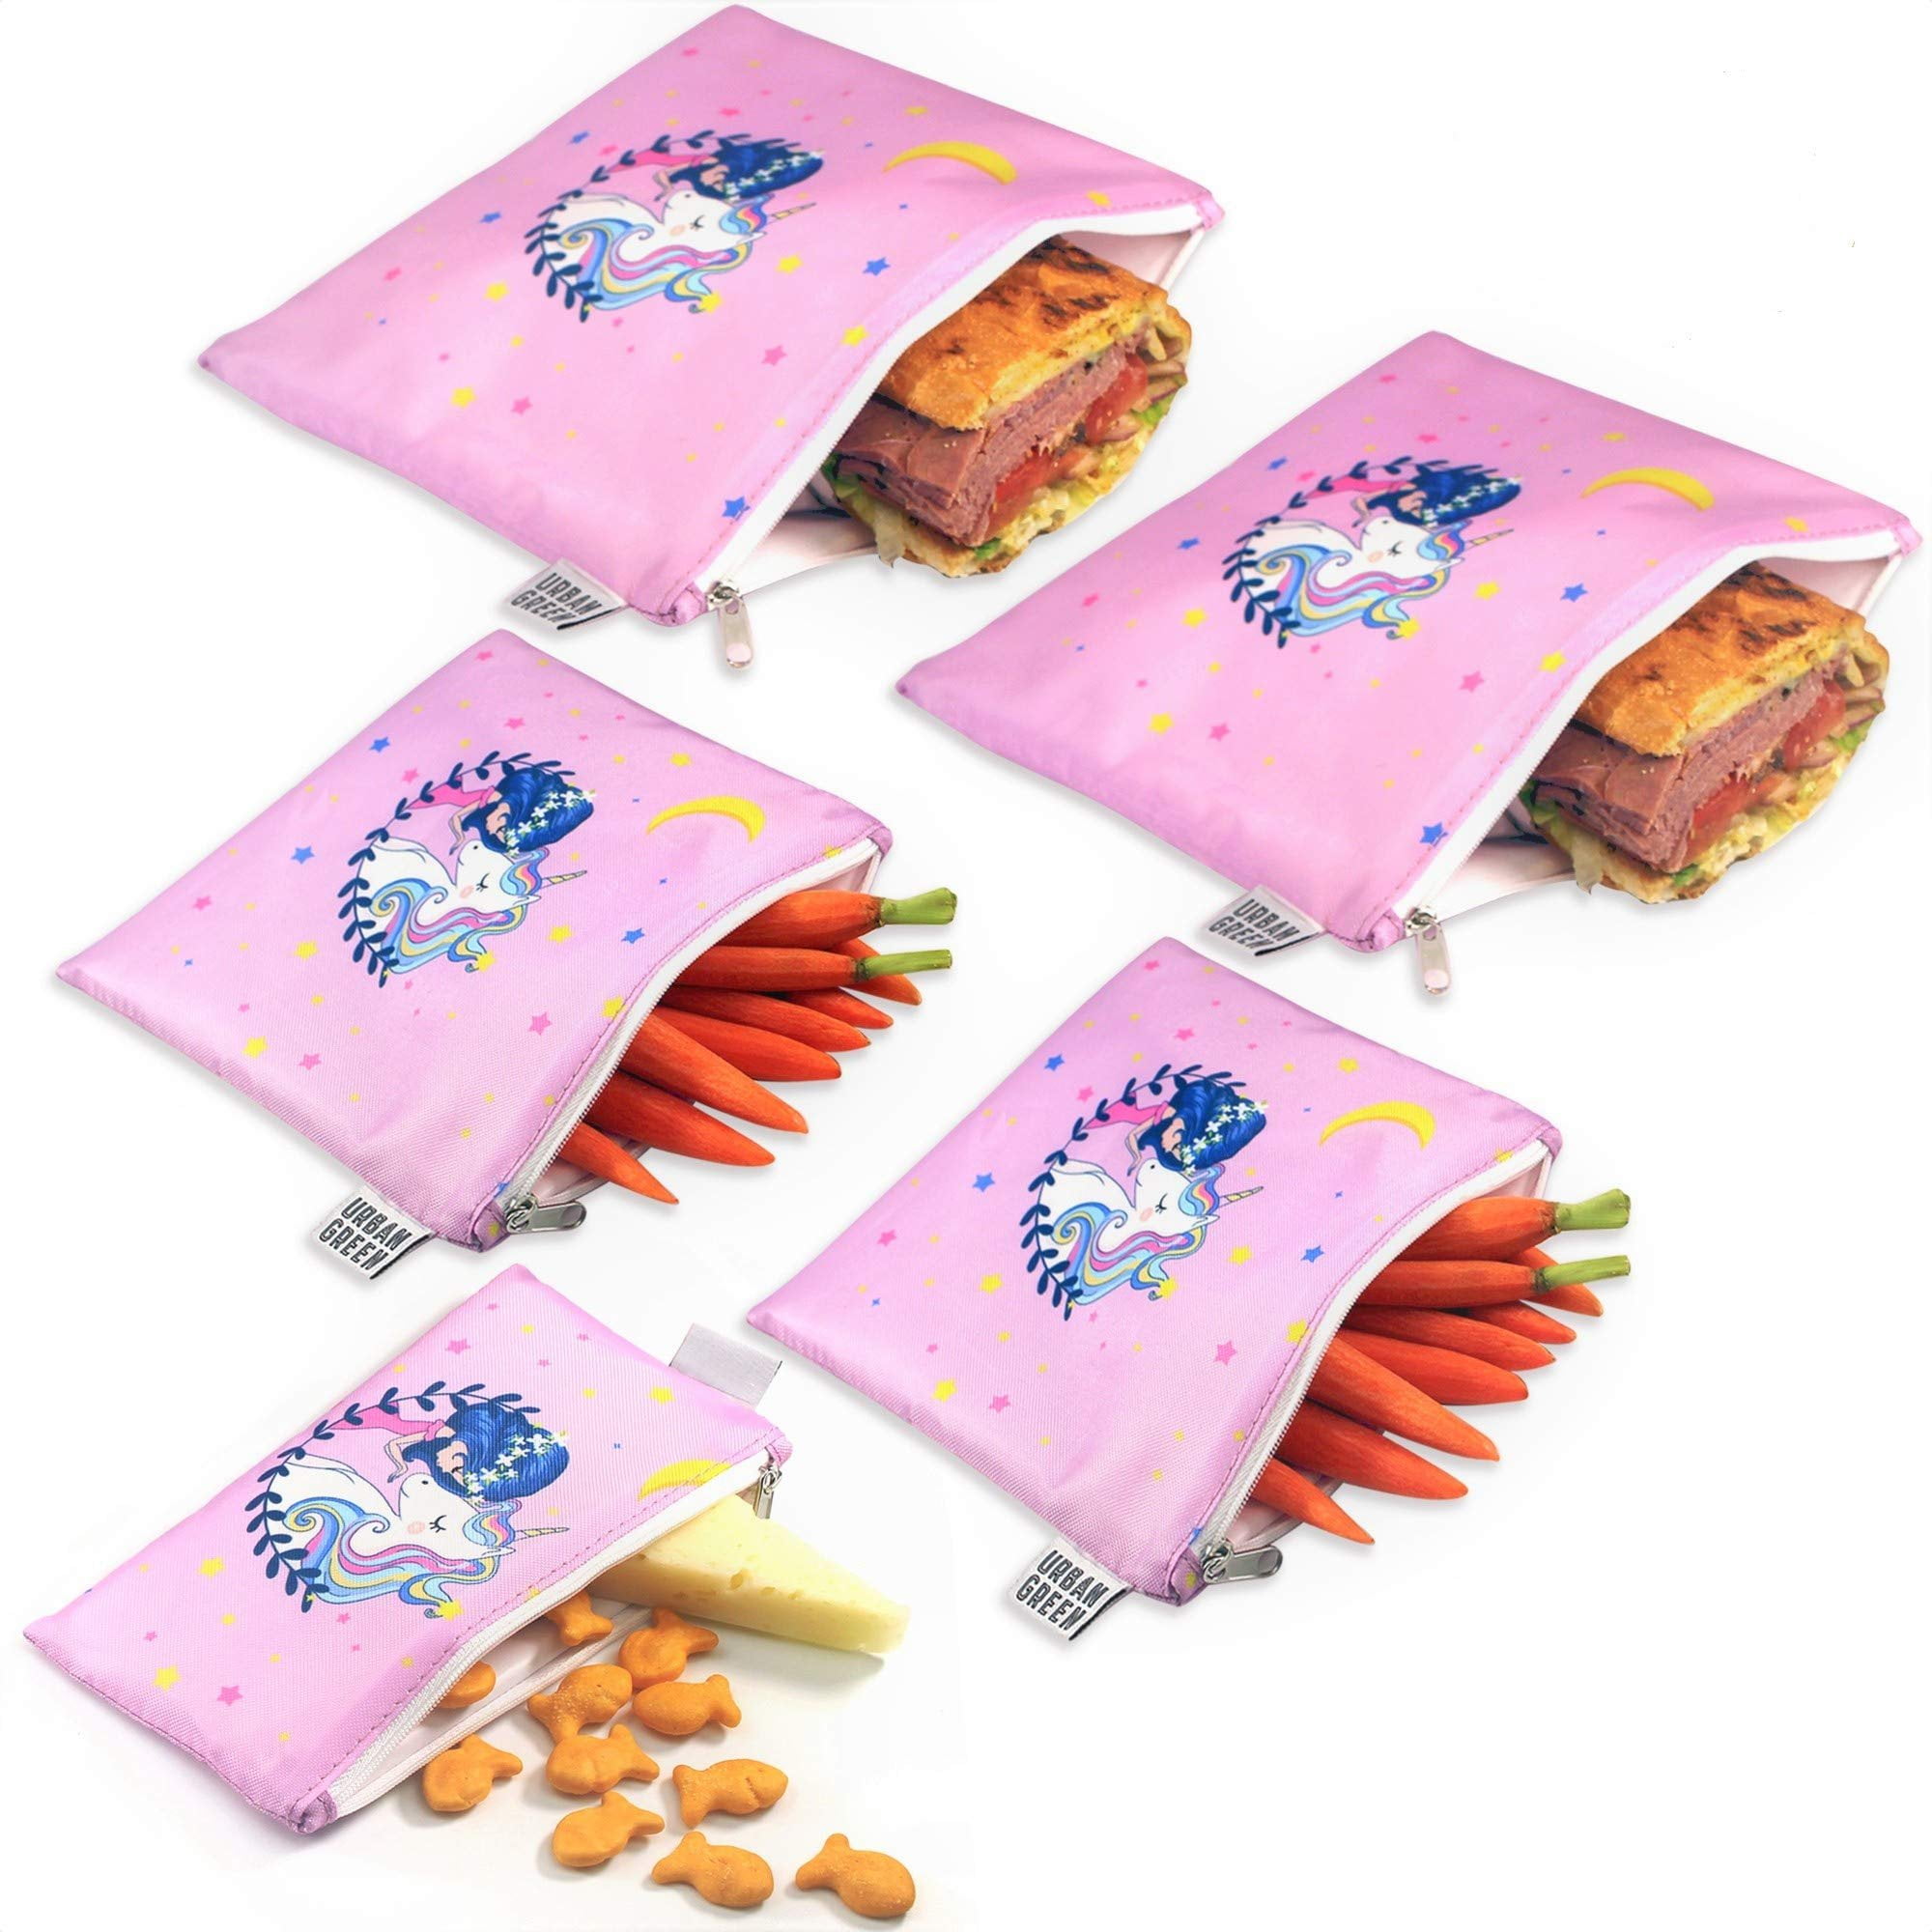  6 Pcs Reusable Snack Bags for Kids School Gift Food